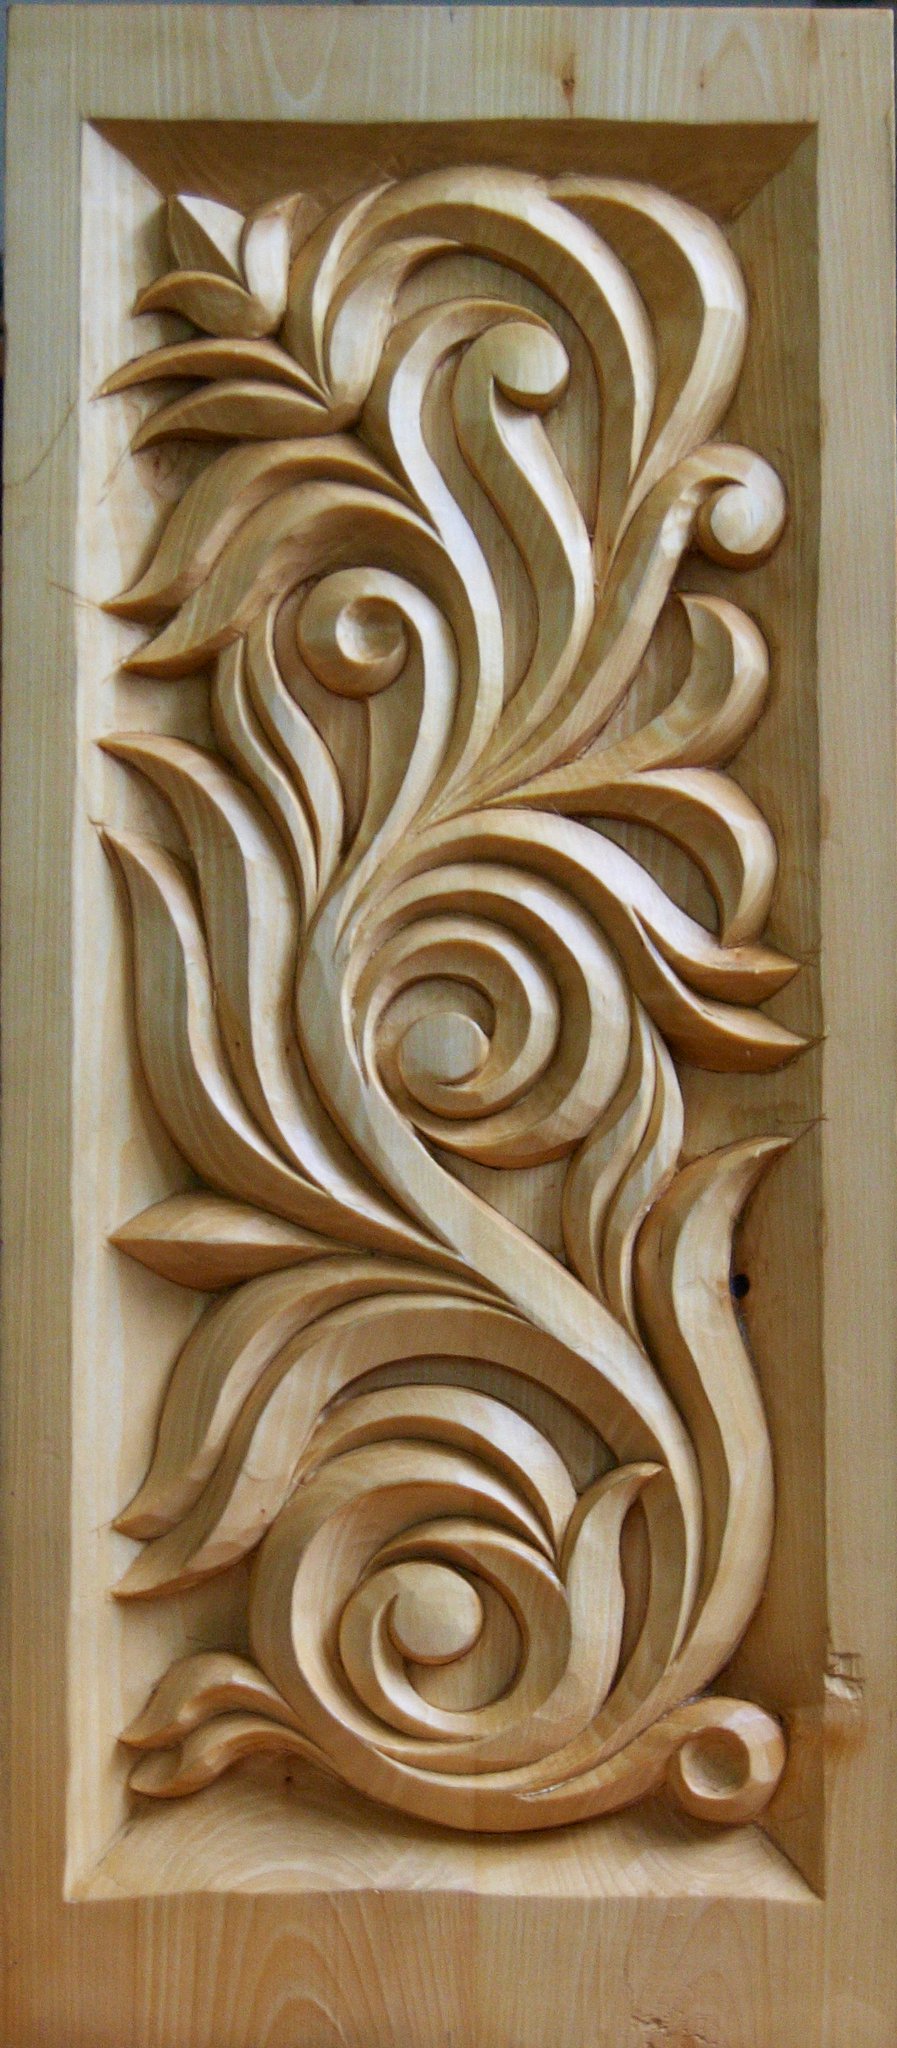 20 Free DIY Wood Carving Patterns You Can Create Today (with Pictures